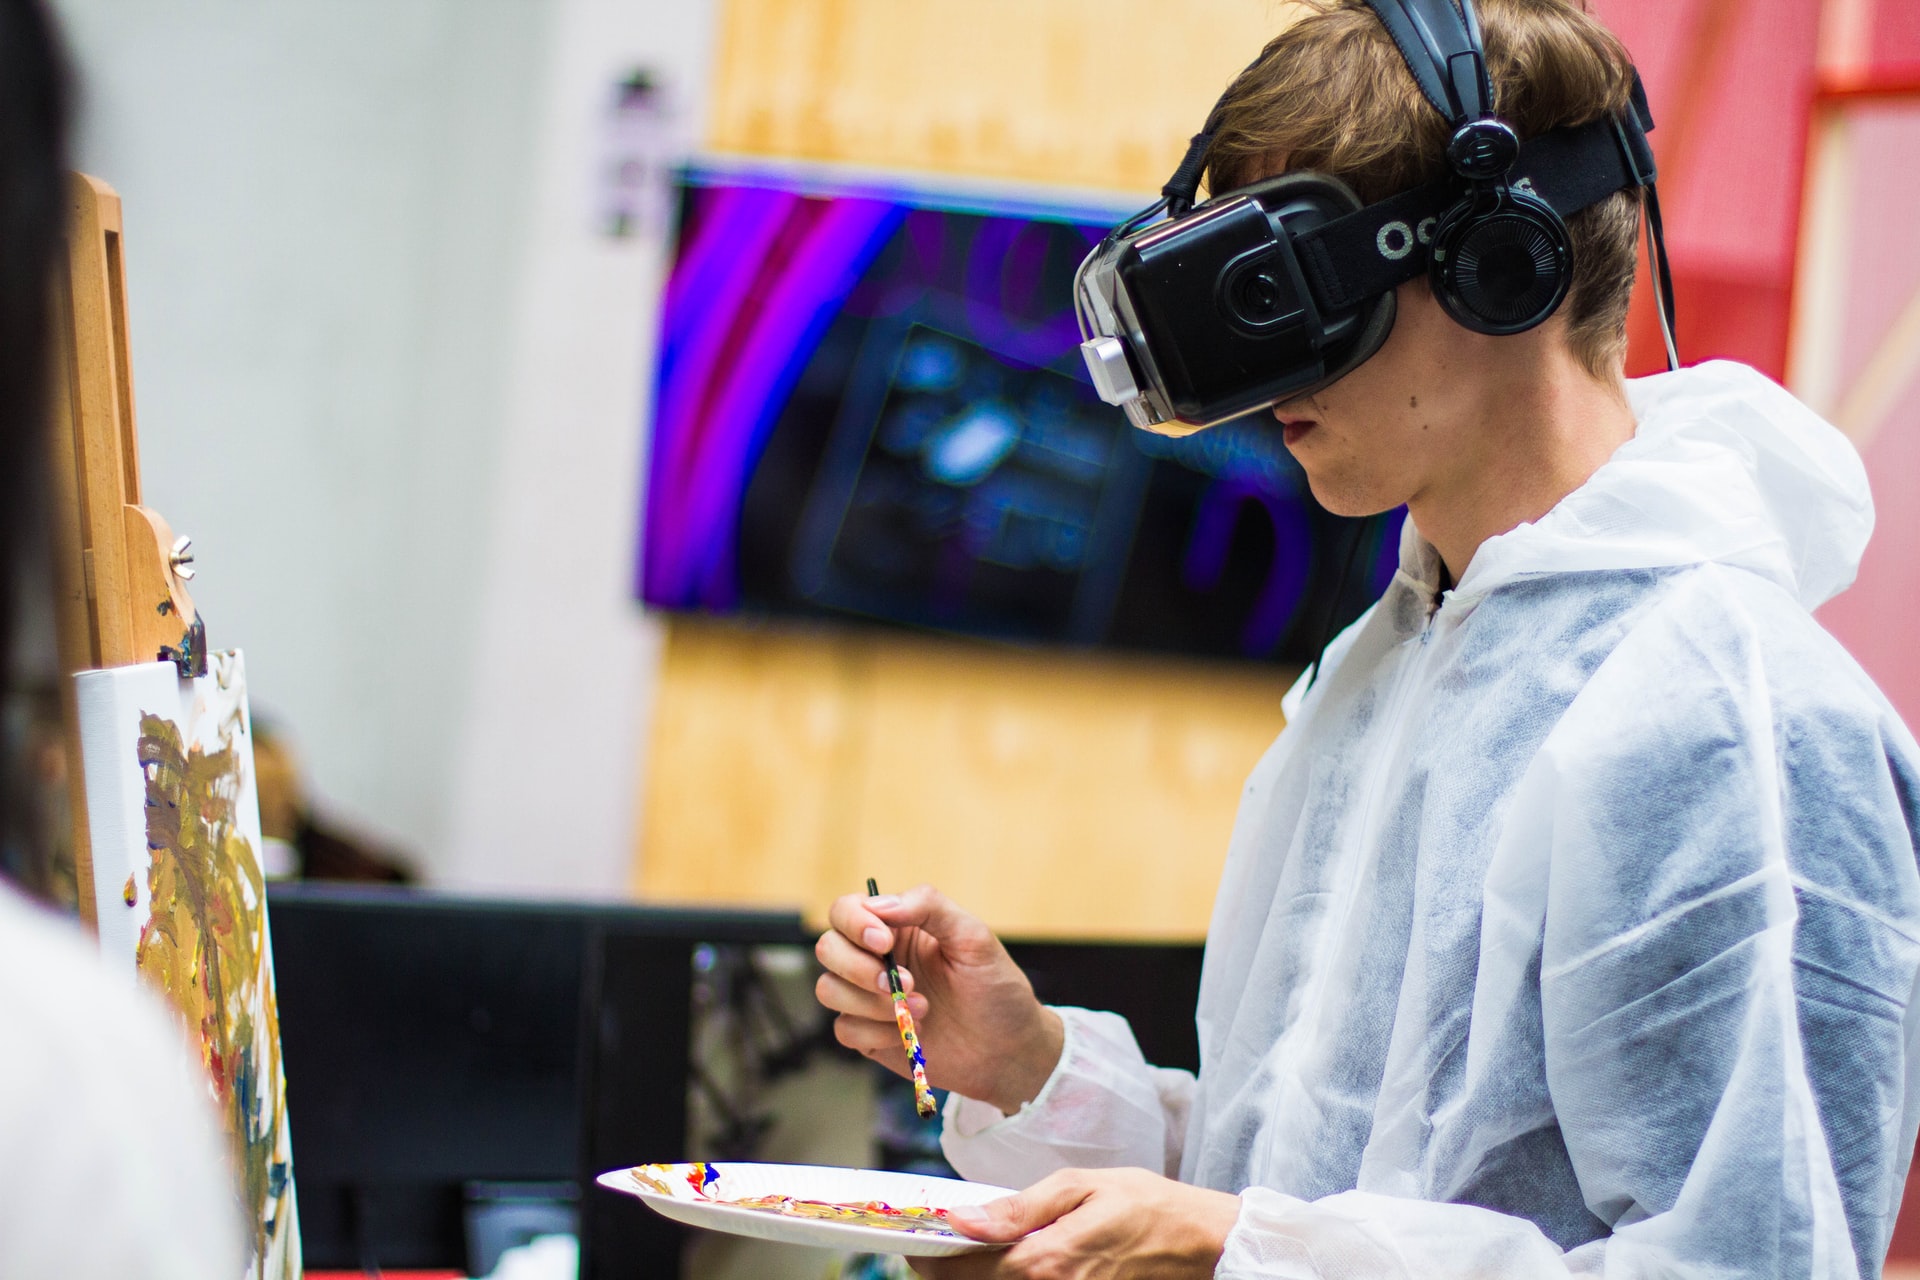 How To Use Virtual Reality To Motivate College Students